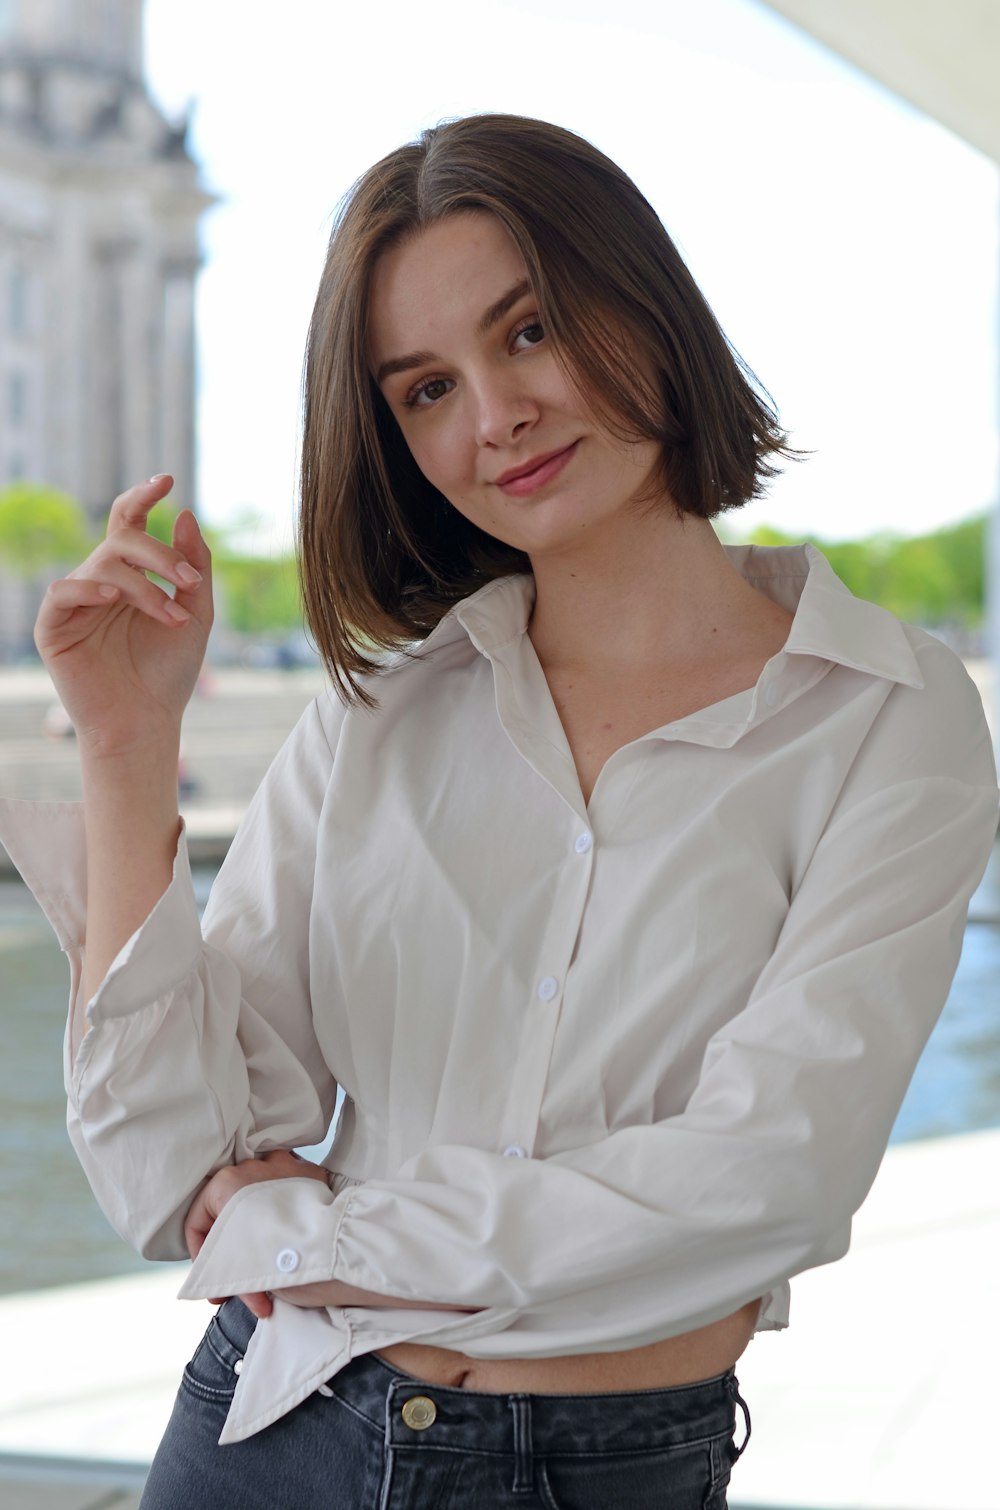 a woman in a white shirt is holding a cigarette